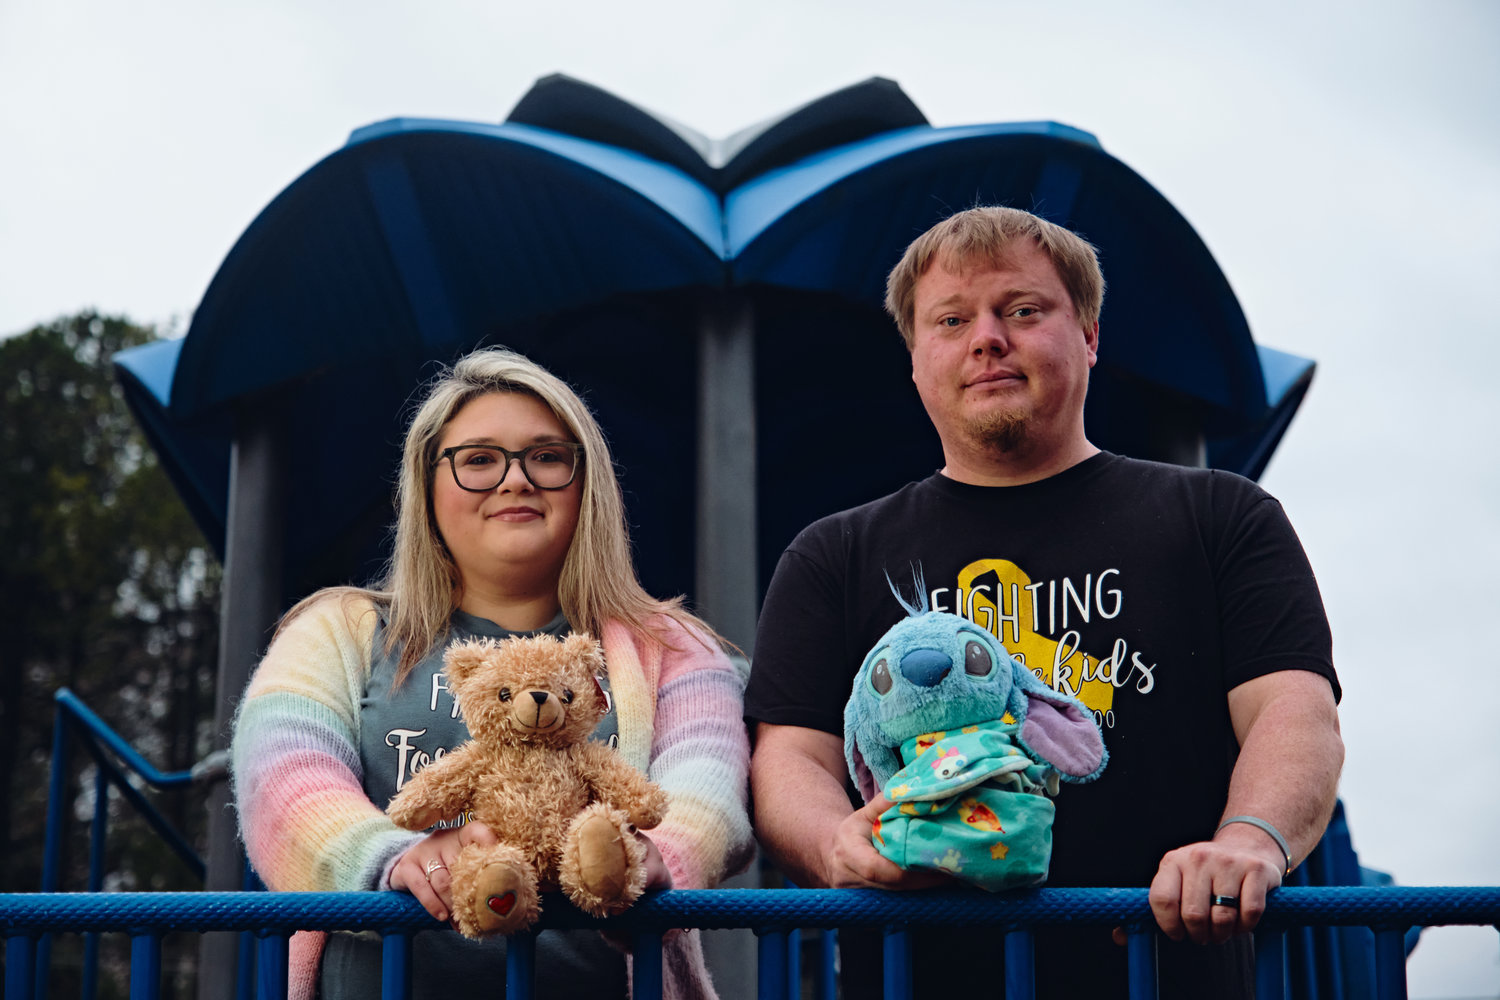 Meghan and Dusty Scoggins hold beloved stuffed animals of their daughter Kenzie, 5, who died from an aggressive brain tumor on Sept. 18. Kenzie loved Disney movies, and her favorite character was Stitch from 'Lilo & Stitch.'